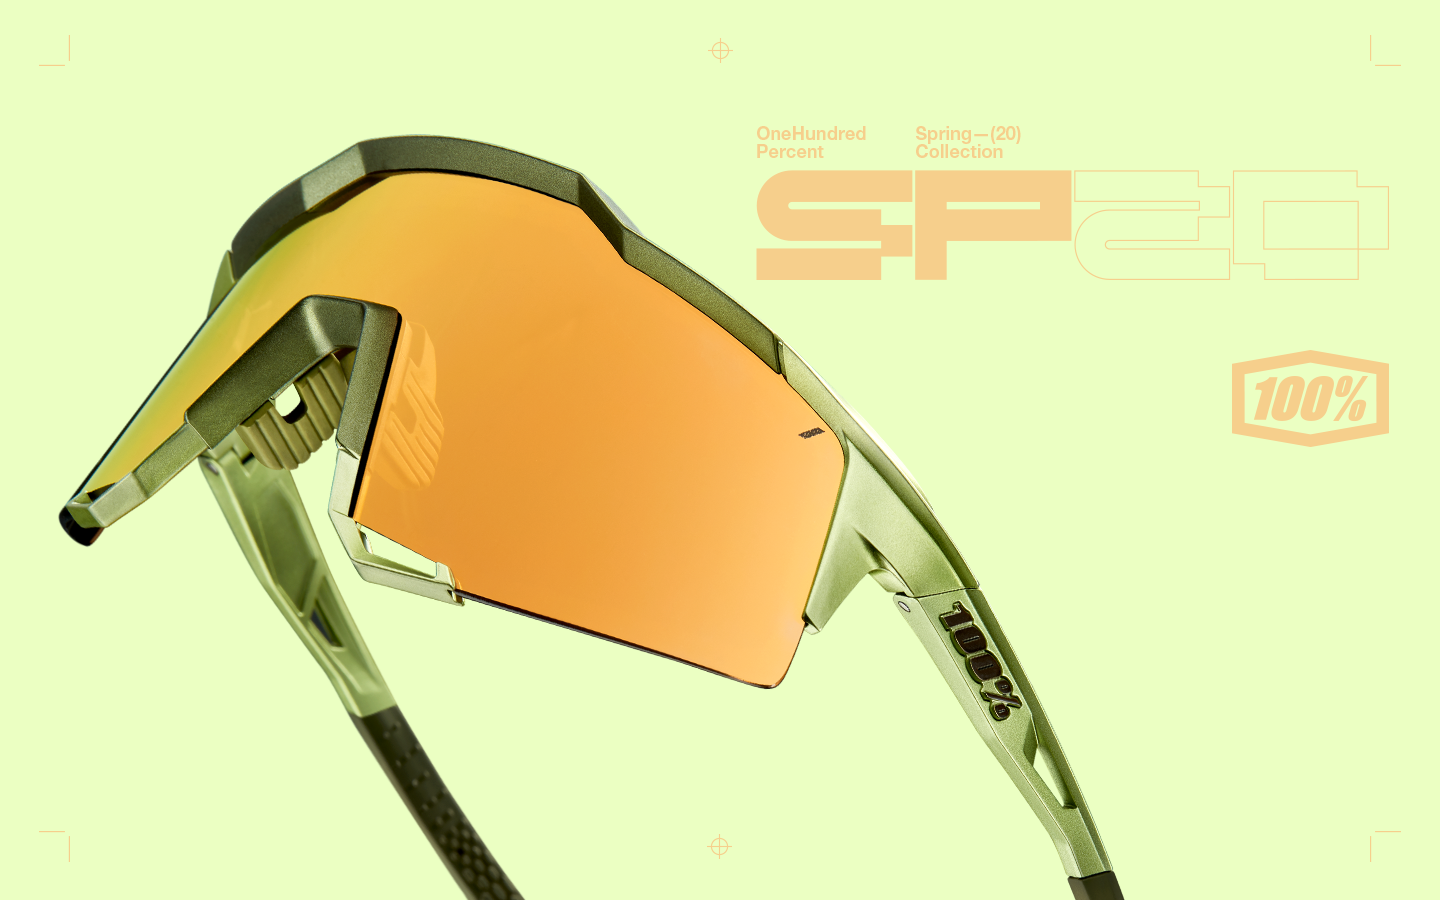 Introducing the SP20 Eyewear Collection